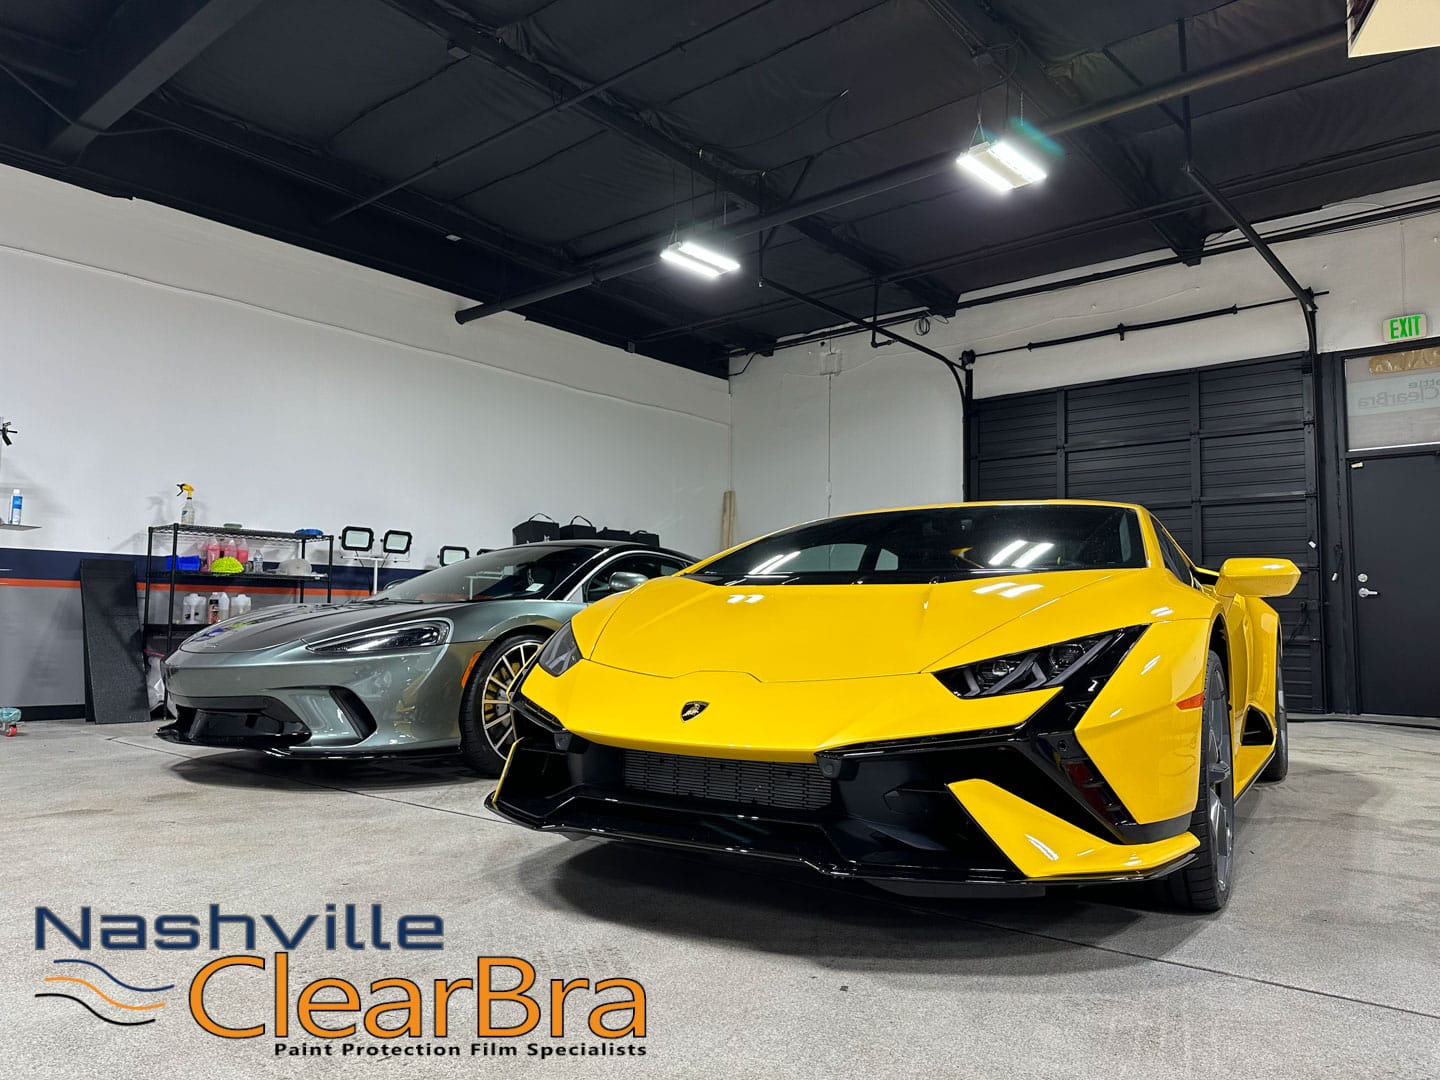 Wichita Clear Bra - Ceramic Coating, Paint Protection, Window Tinting &  Detailing.